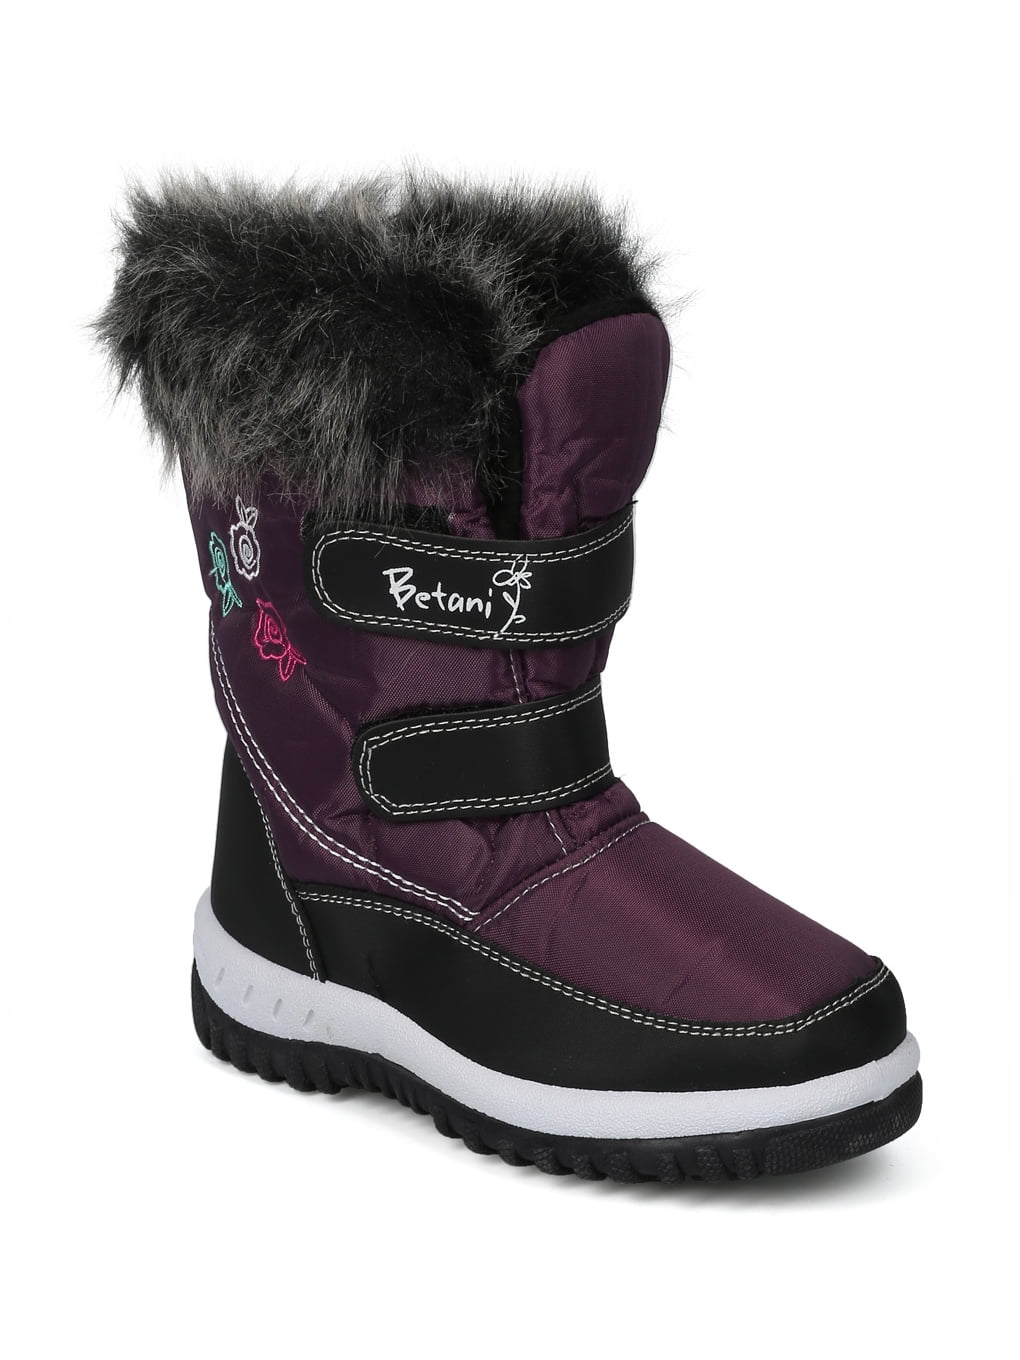 BETANI Kids Girls Winter Boots Size 2 Warm Colorful Snow Boots Tia-4